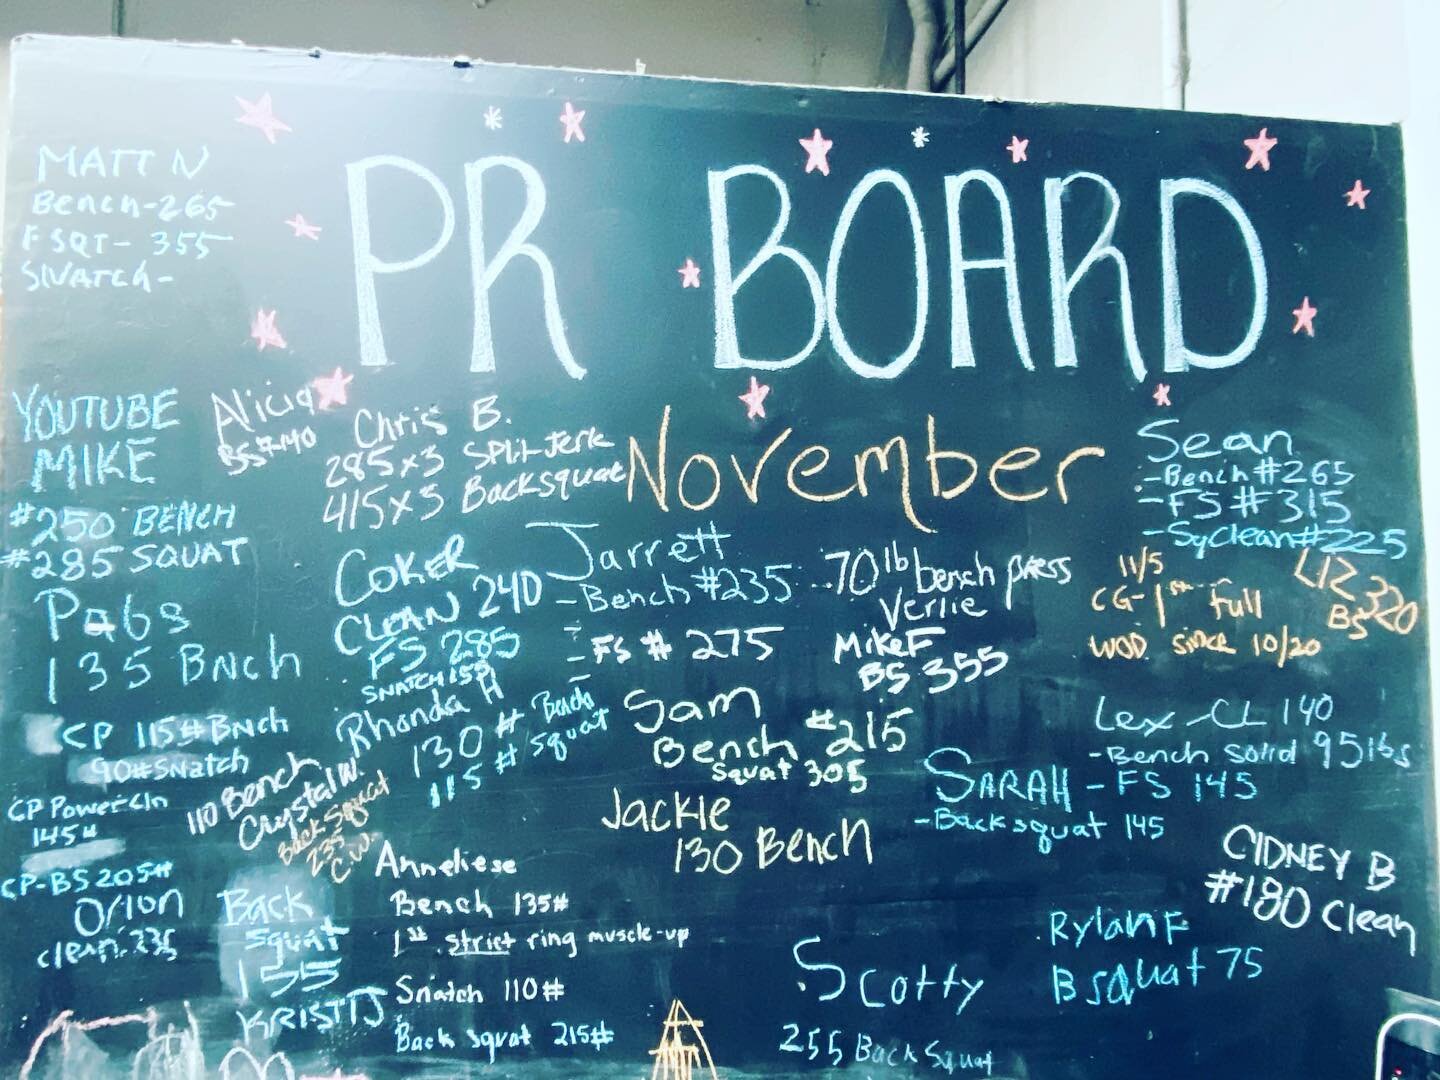 The PR board. This represents what intentional work will do. 12 weeks of work. Little bits of work over time. #crossfit #crossfitloomis #crossfittersdaily #crossfitbox #crossfitathlete #wodoftheday #sweatsession #workharder #trainsoican #fitness #sim